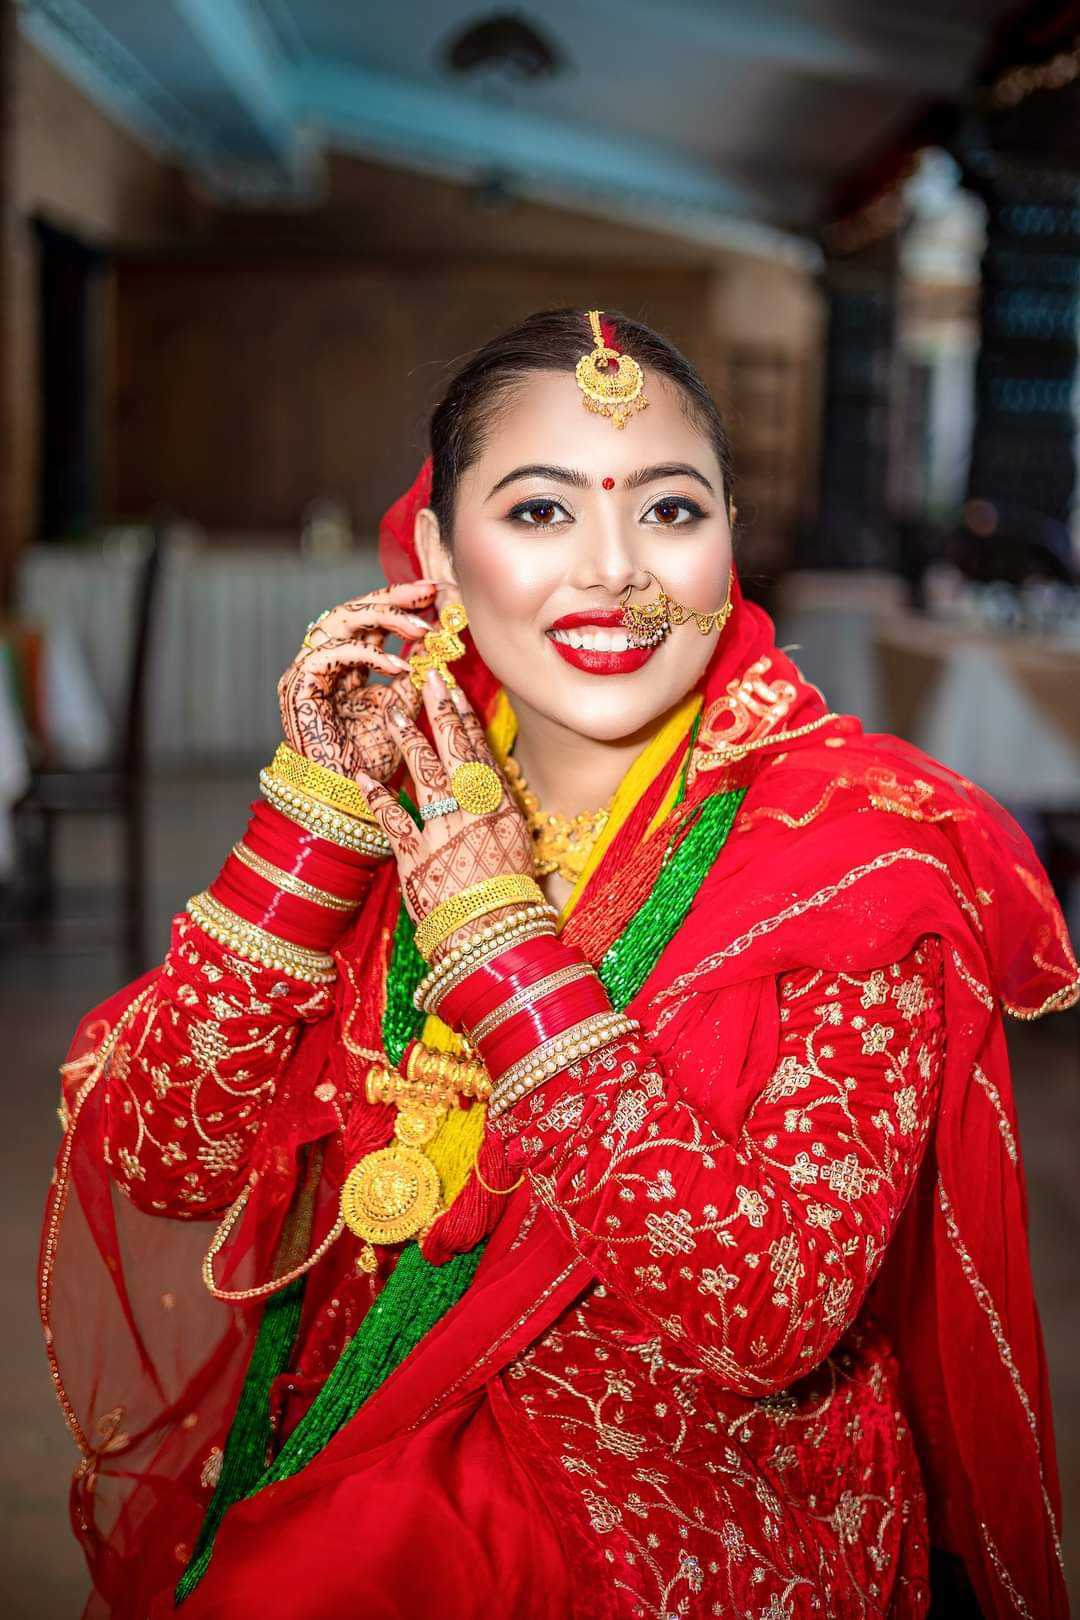 Simma.s culture Hong Kong - Nepali traditional Cultural dress ❤️For more  details about your cultural wears and ornaments please visit here 1/F shop  no 35 (Running cultural dress and ornament) shop no